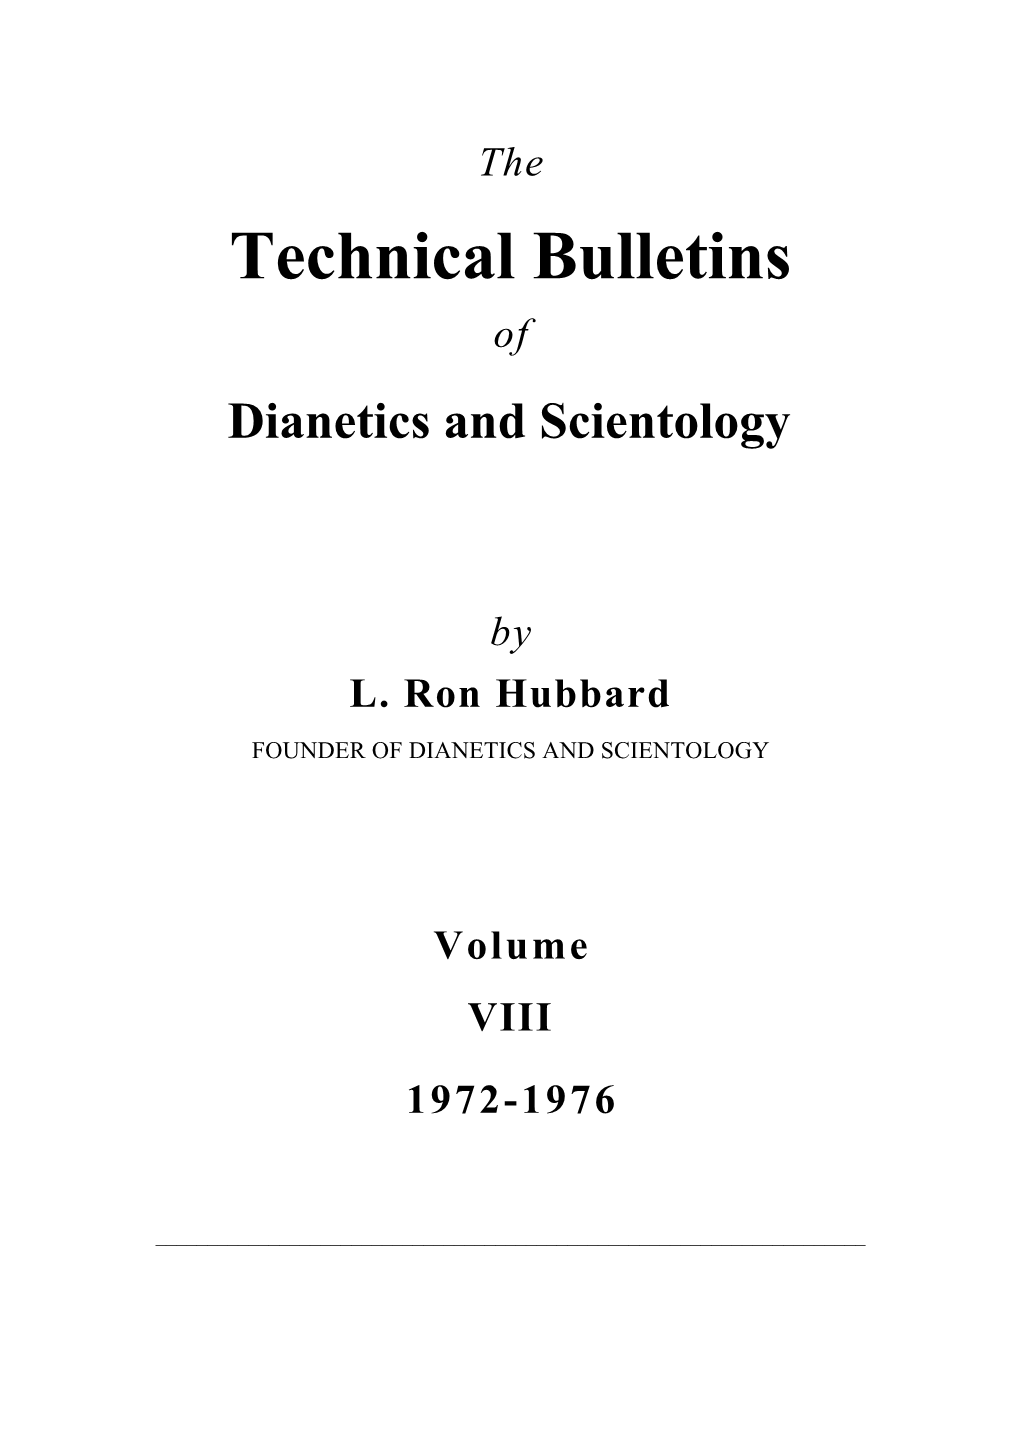 The Technical Bulletins of Dianetics and Scientology by L